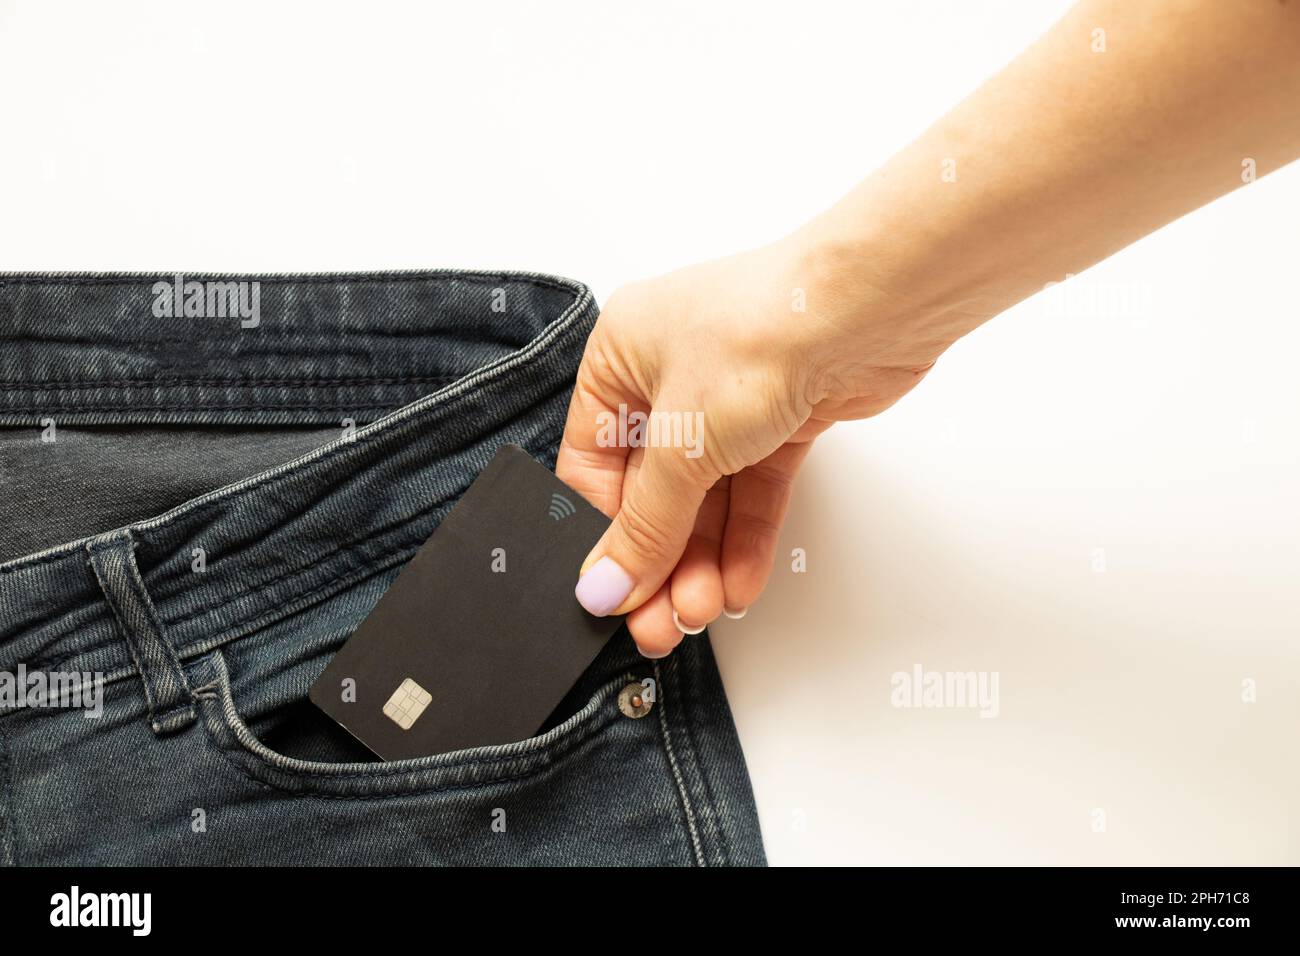 A woman's hand takes out a bank card from a jeans pocket, money Stock Photo